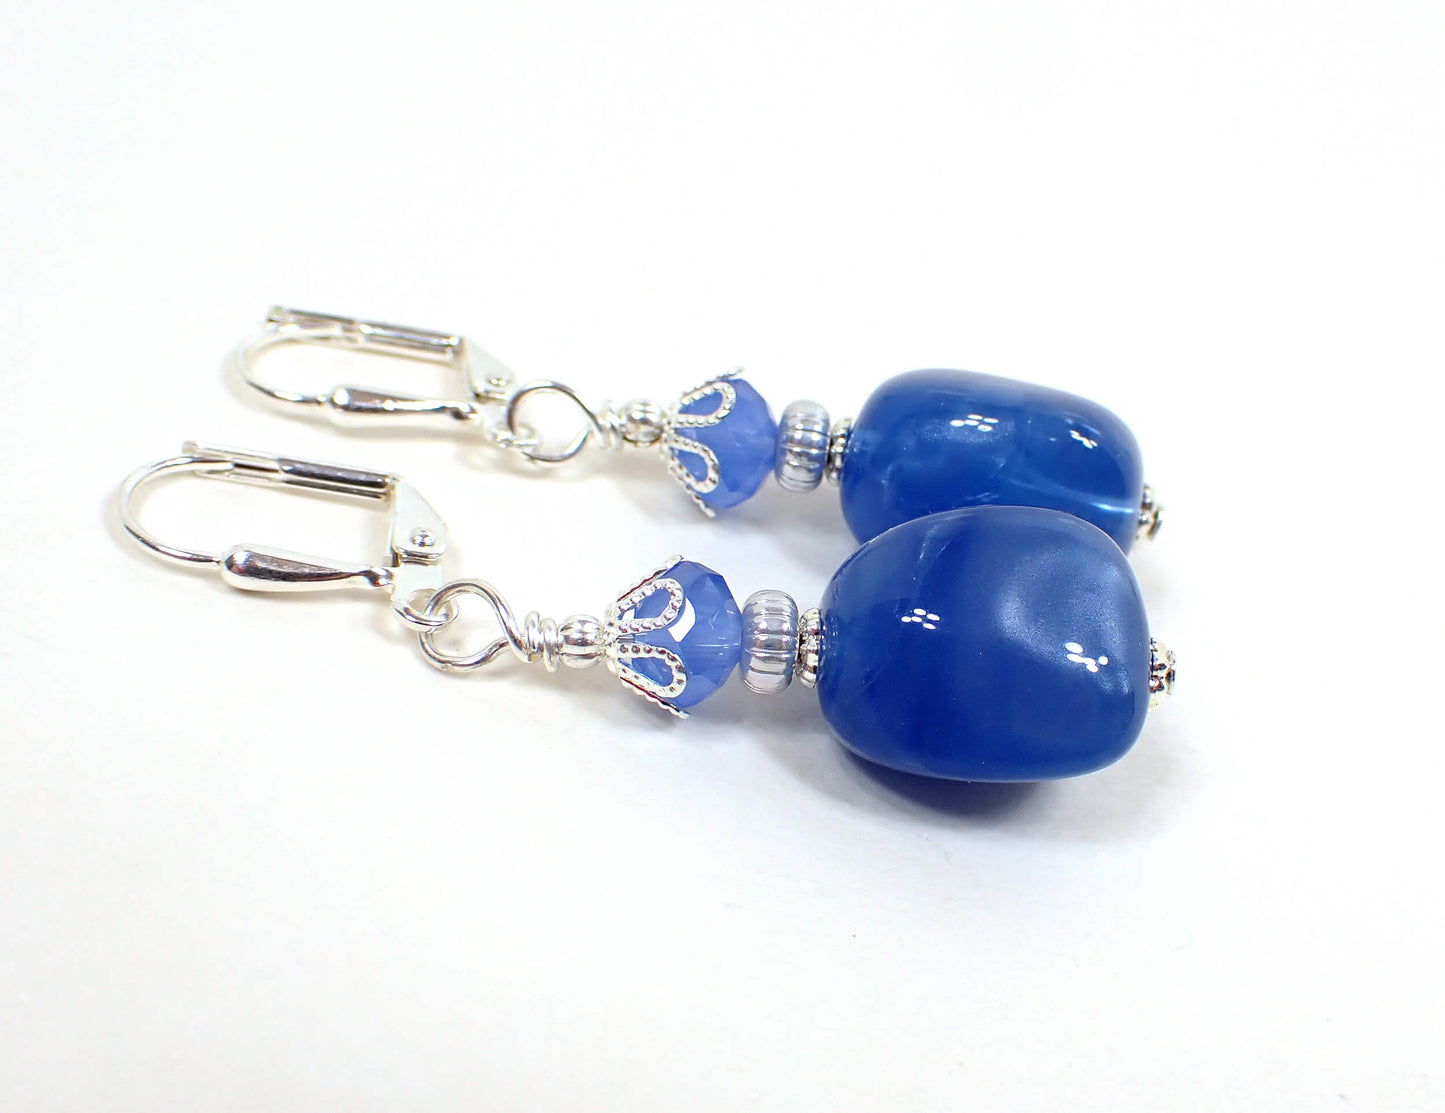 Pearly Blue Lucite Handmade Drop Earrings Silver Plated Hook Lever Back or Clip On